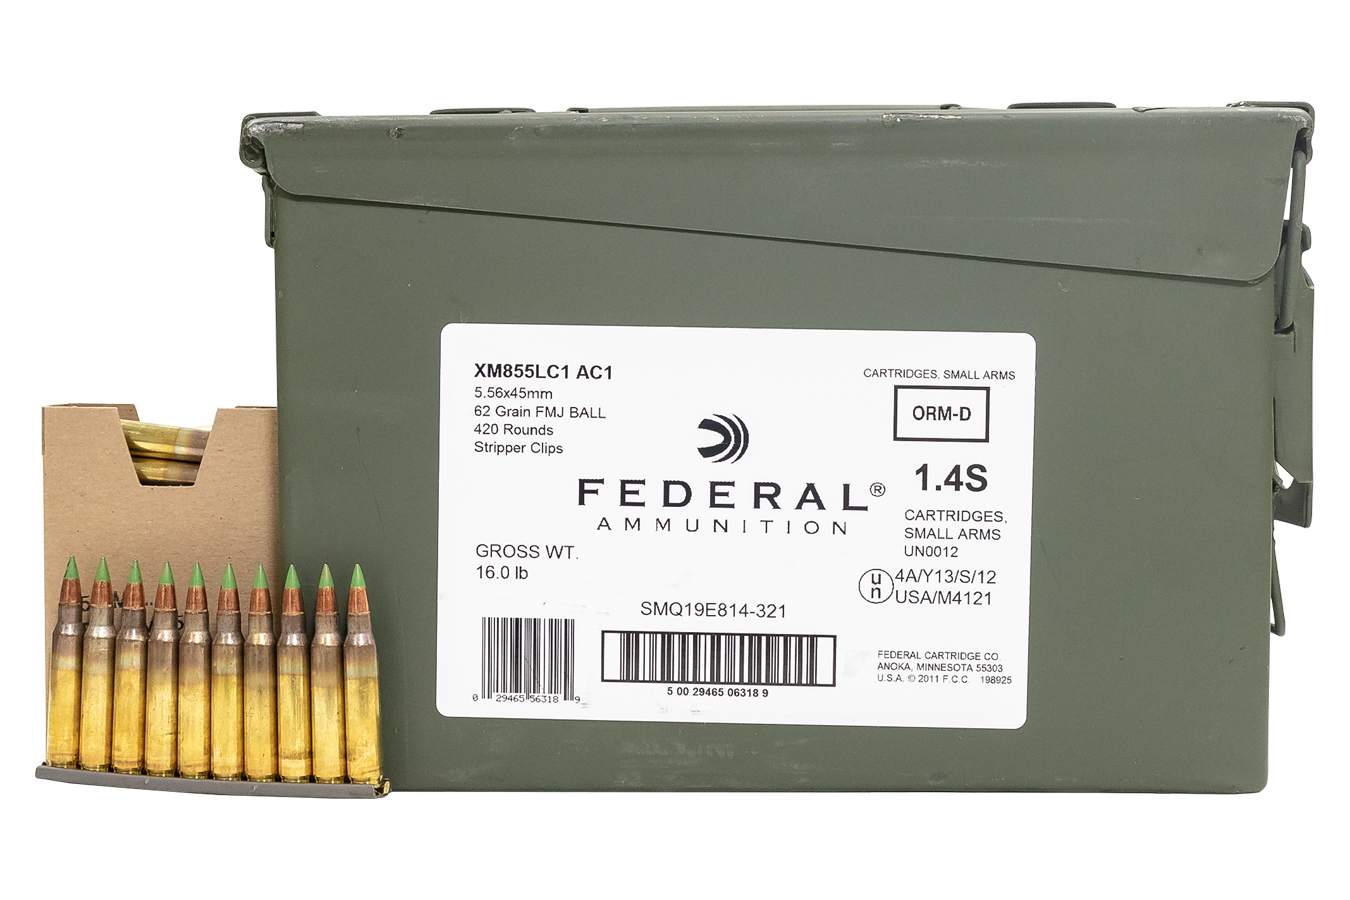 federal-xm855-5-56-62gr-stripper-clips-ammo-can-420-rounds-sportsman